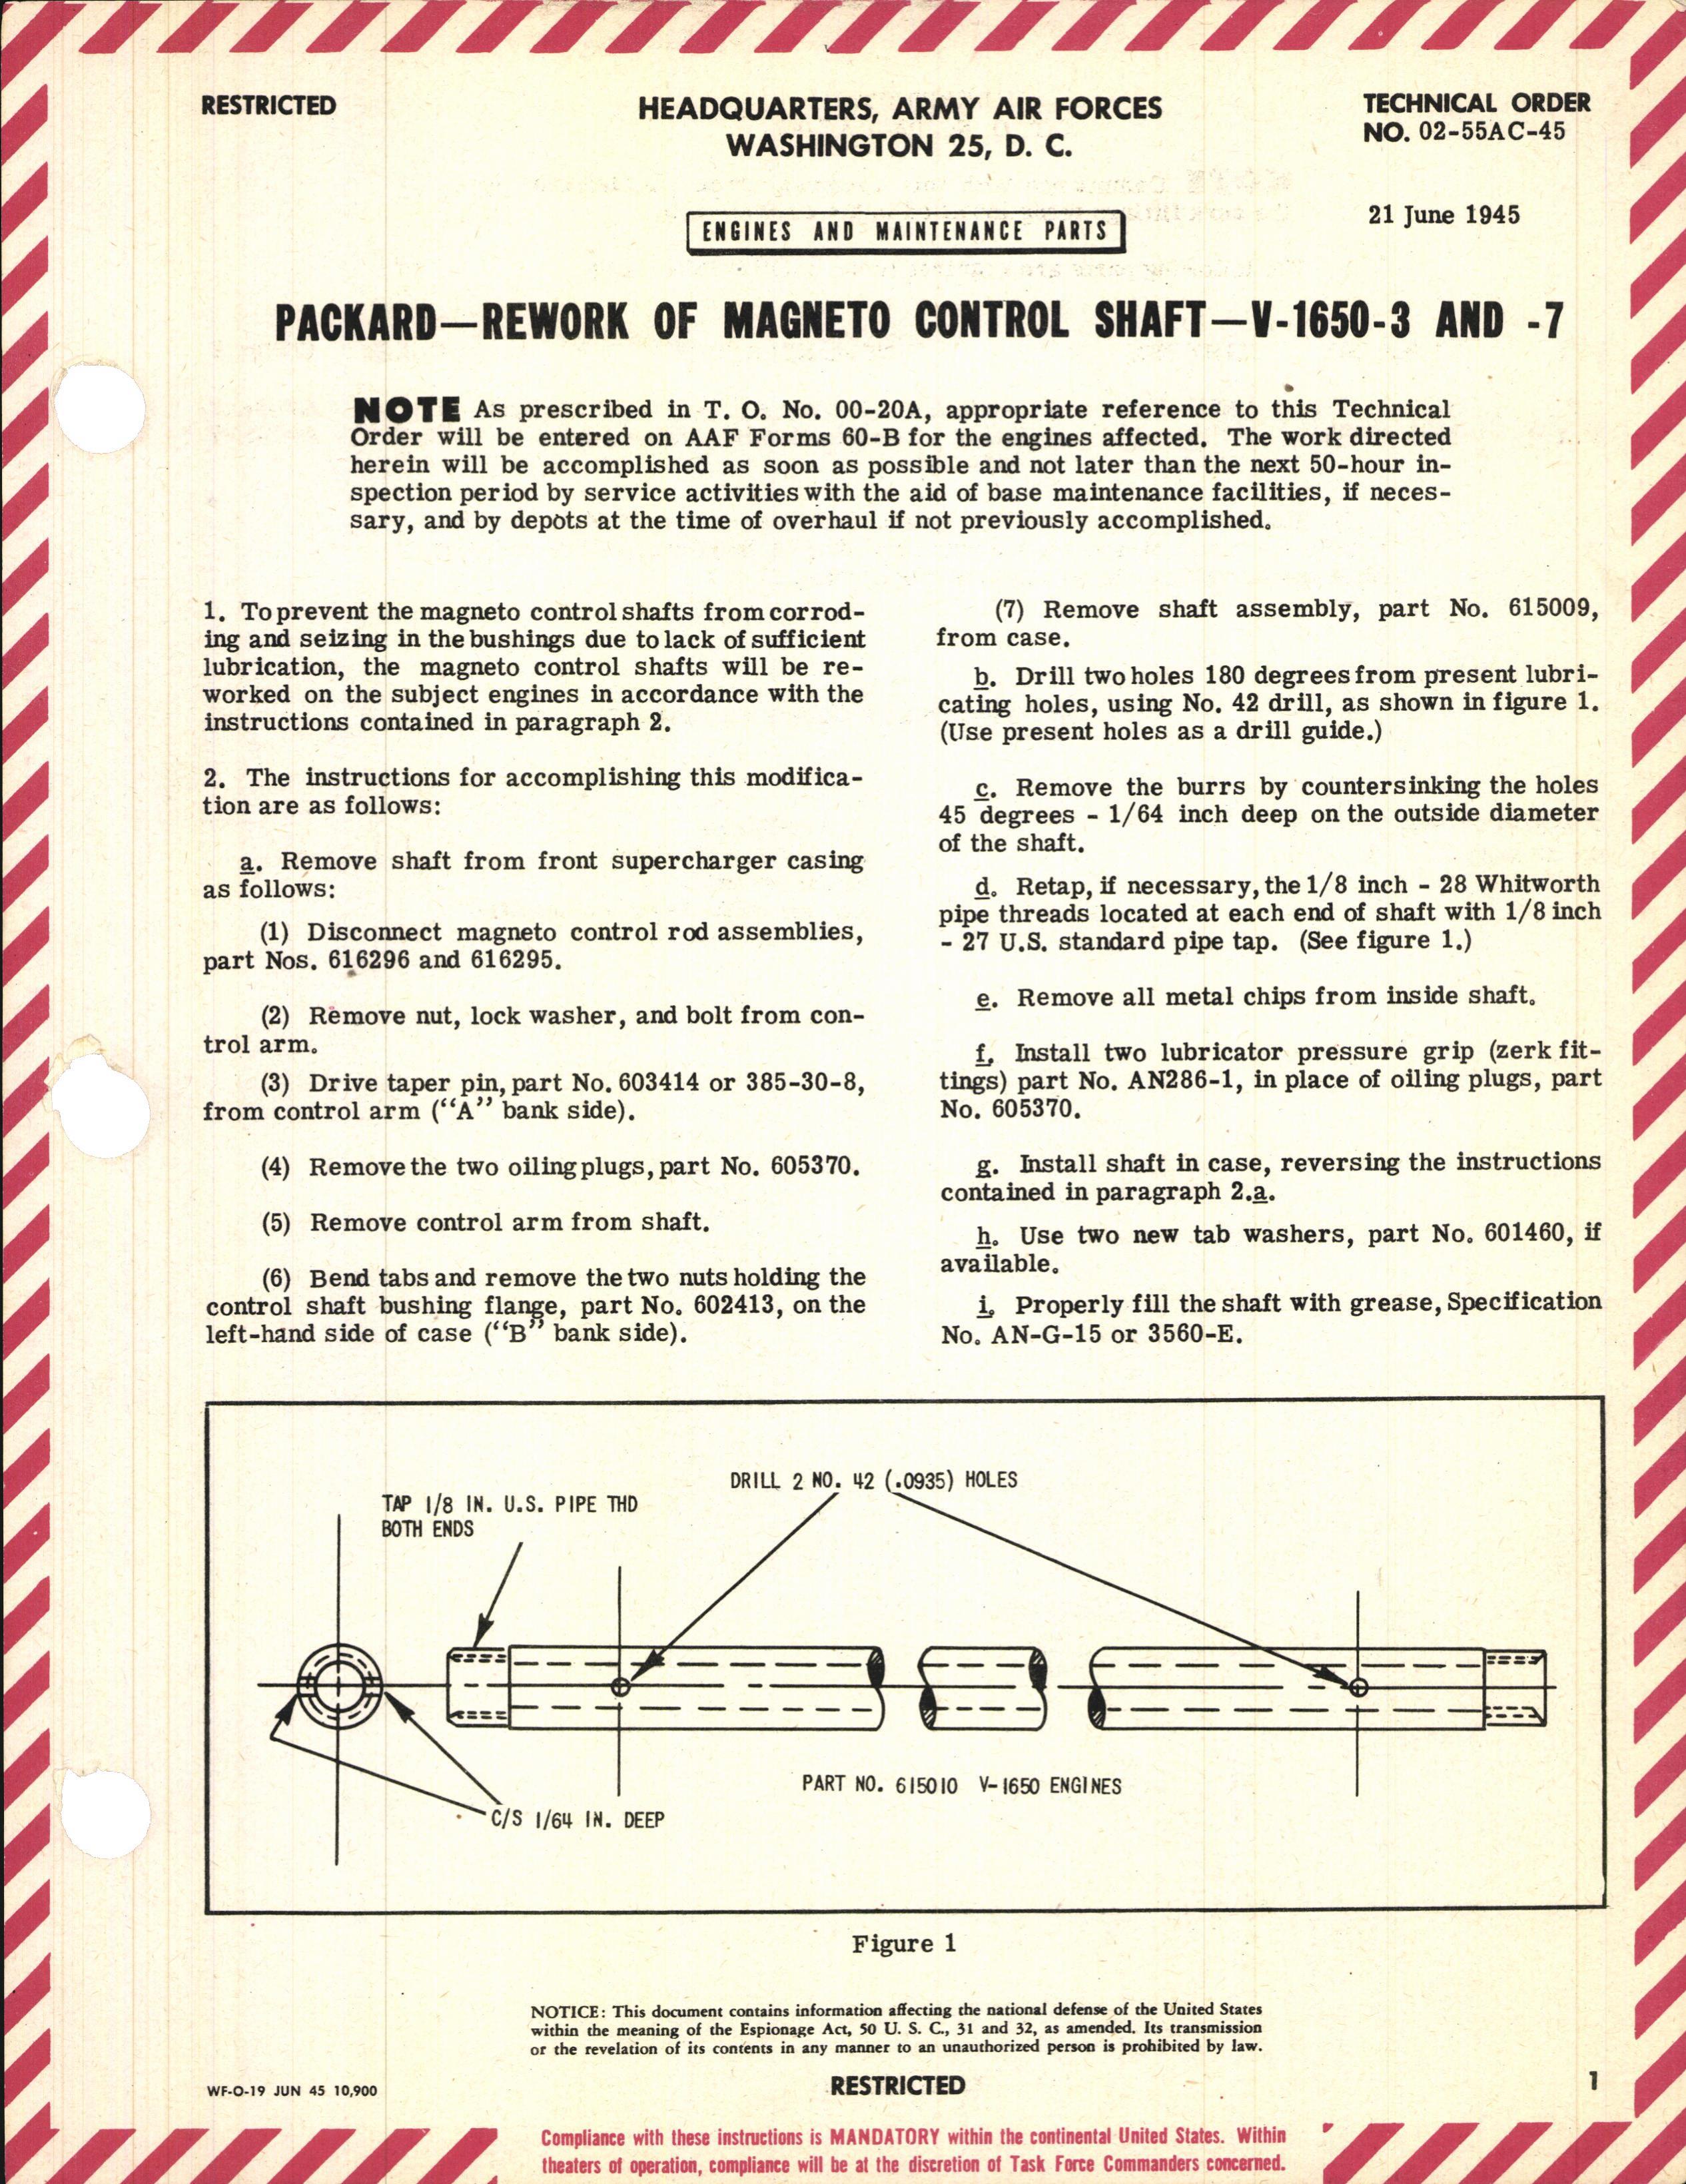 Sample page 1 from AirCorps Library document: Rework of Magneto Control Shaft for V-1650-3 and -7